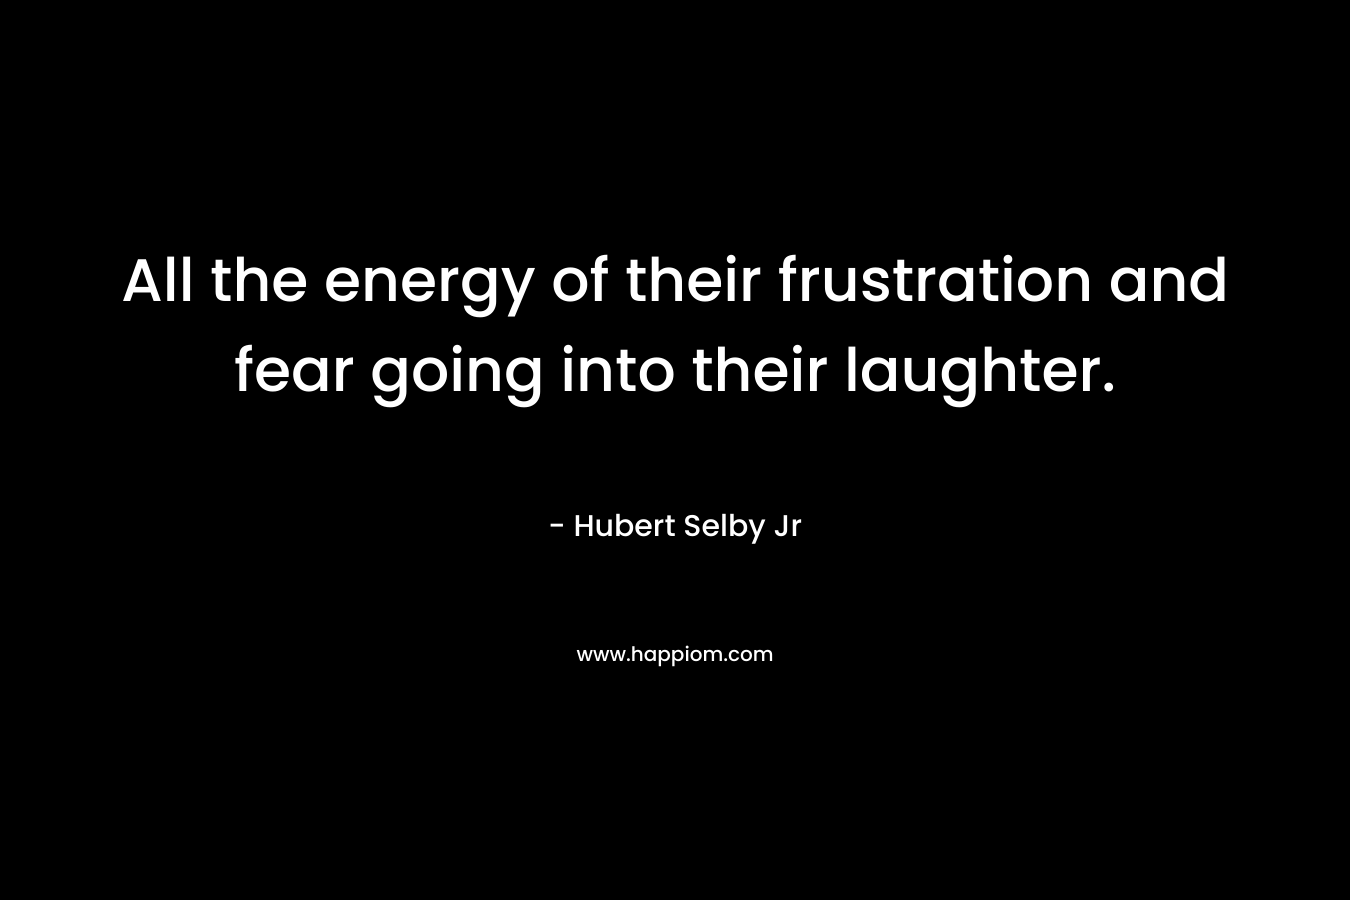 All the energy of their frustration and fear going into their laughter.